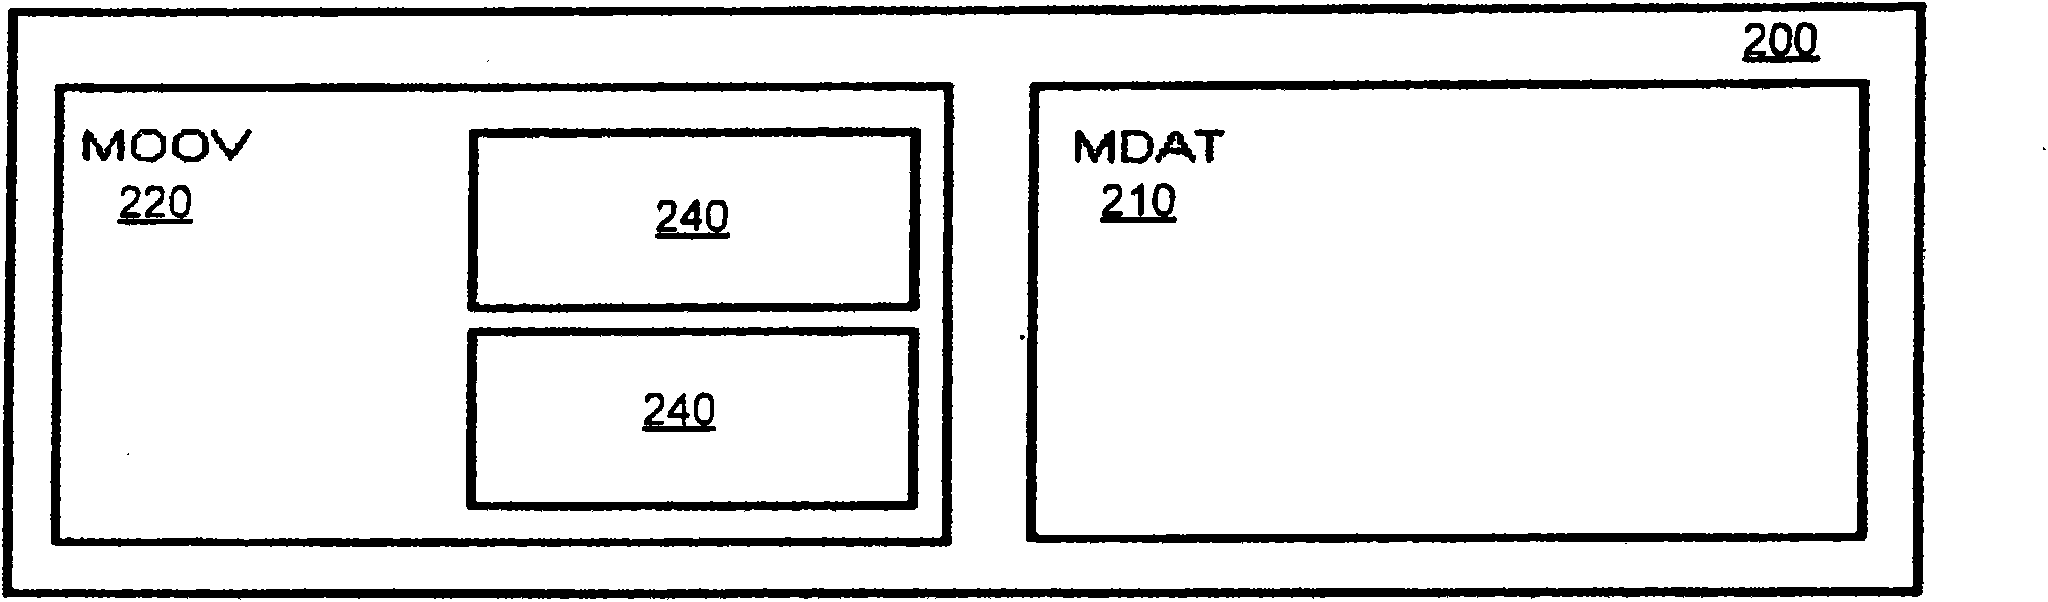 Systems and methods for storage of notification messages in ISO base media file format